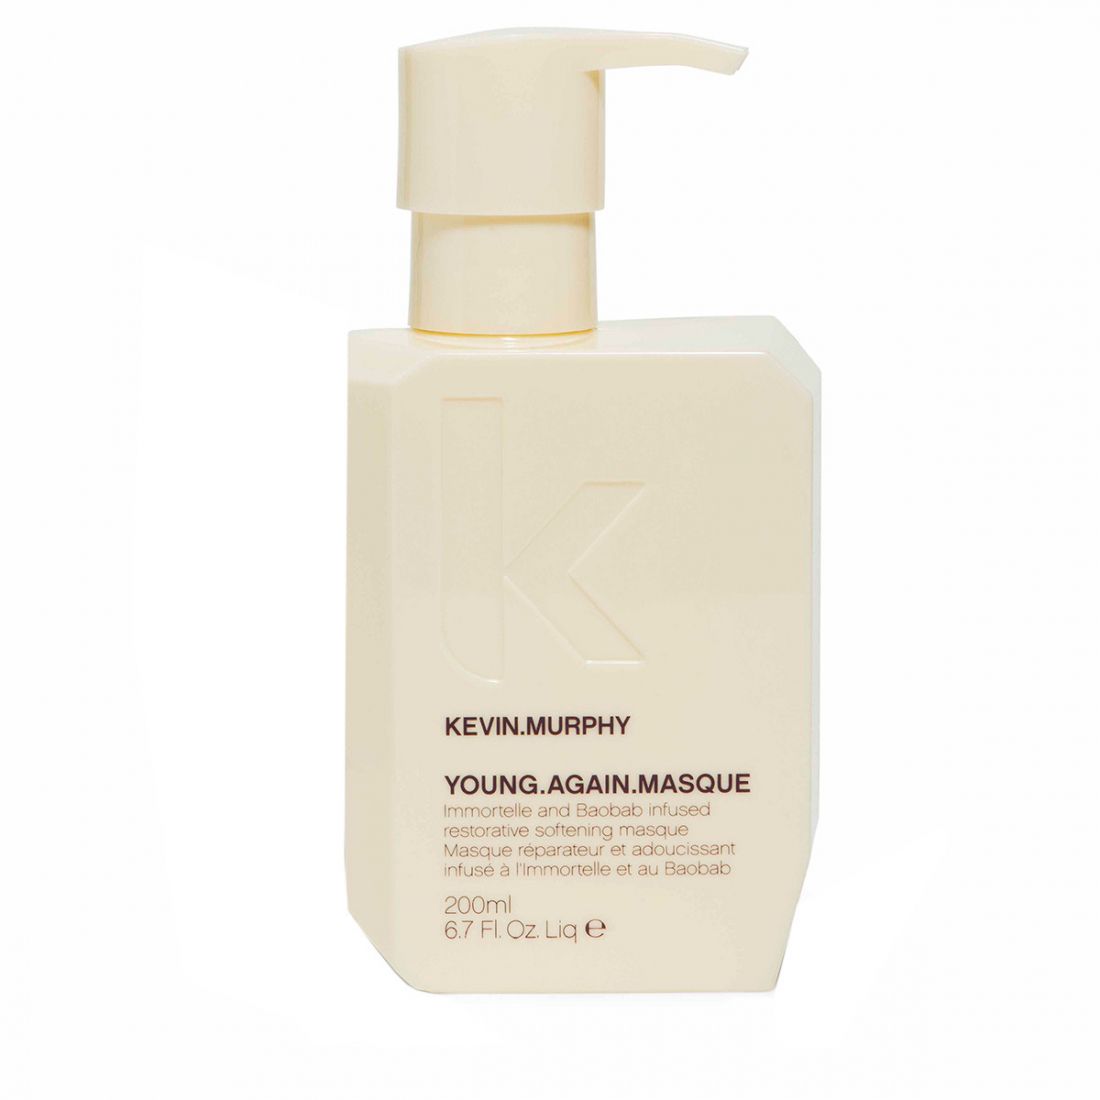 Kevin Murphy - Masque capillaire 'Young.Again.Masque' - 200 ml